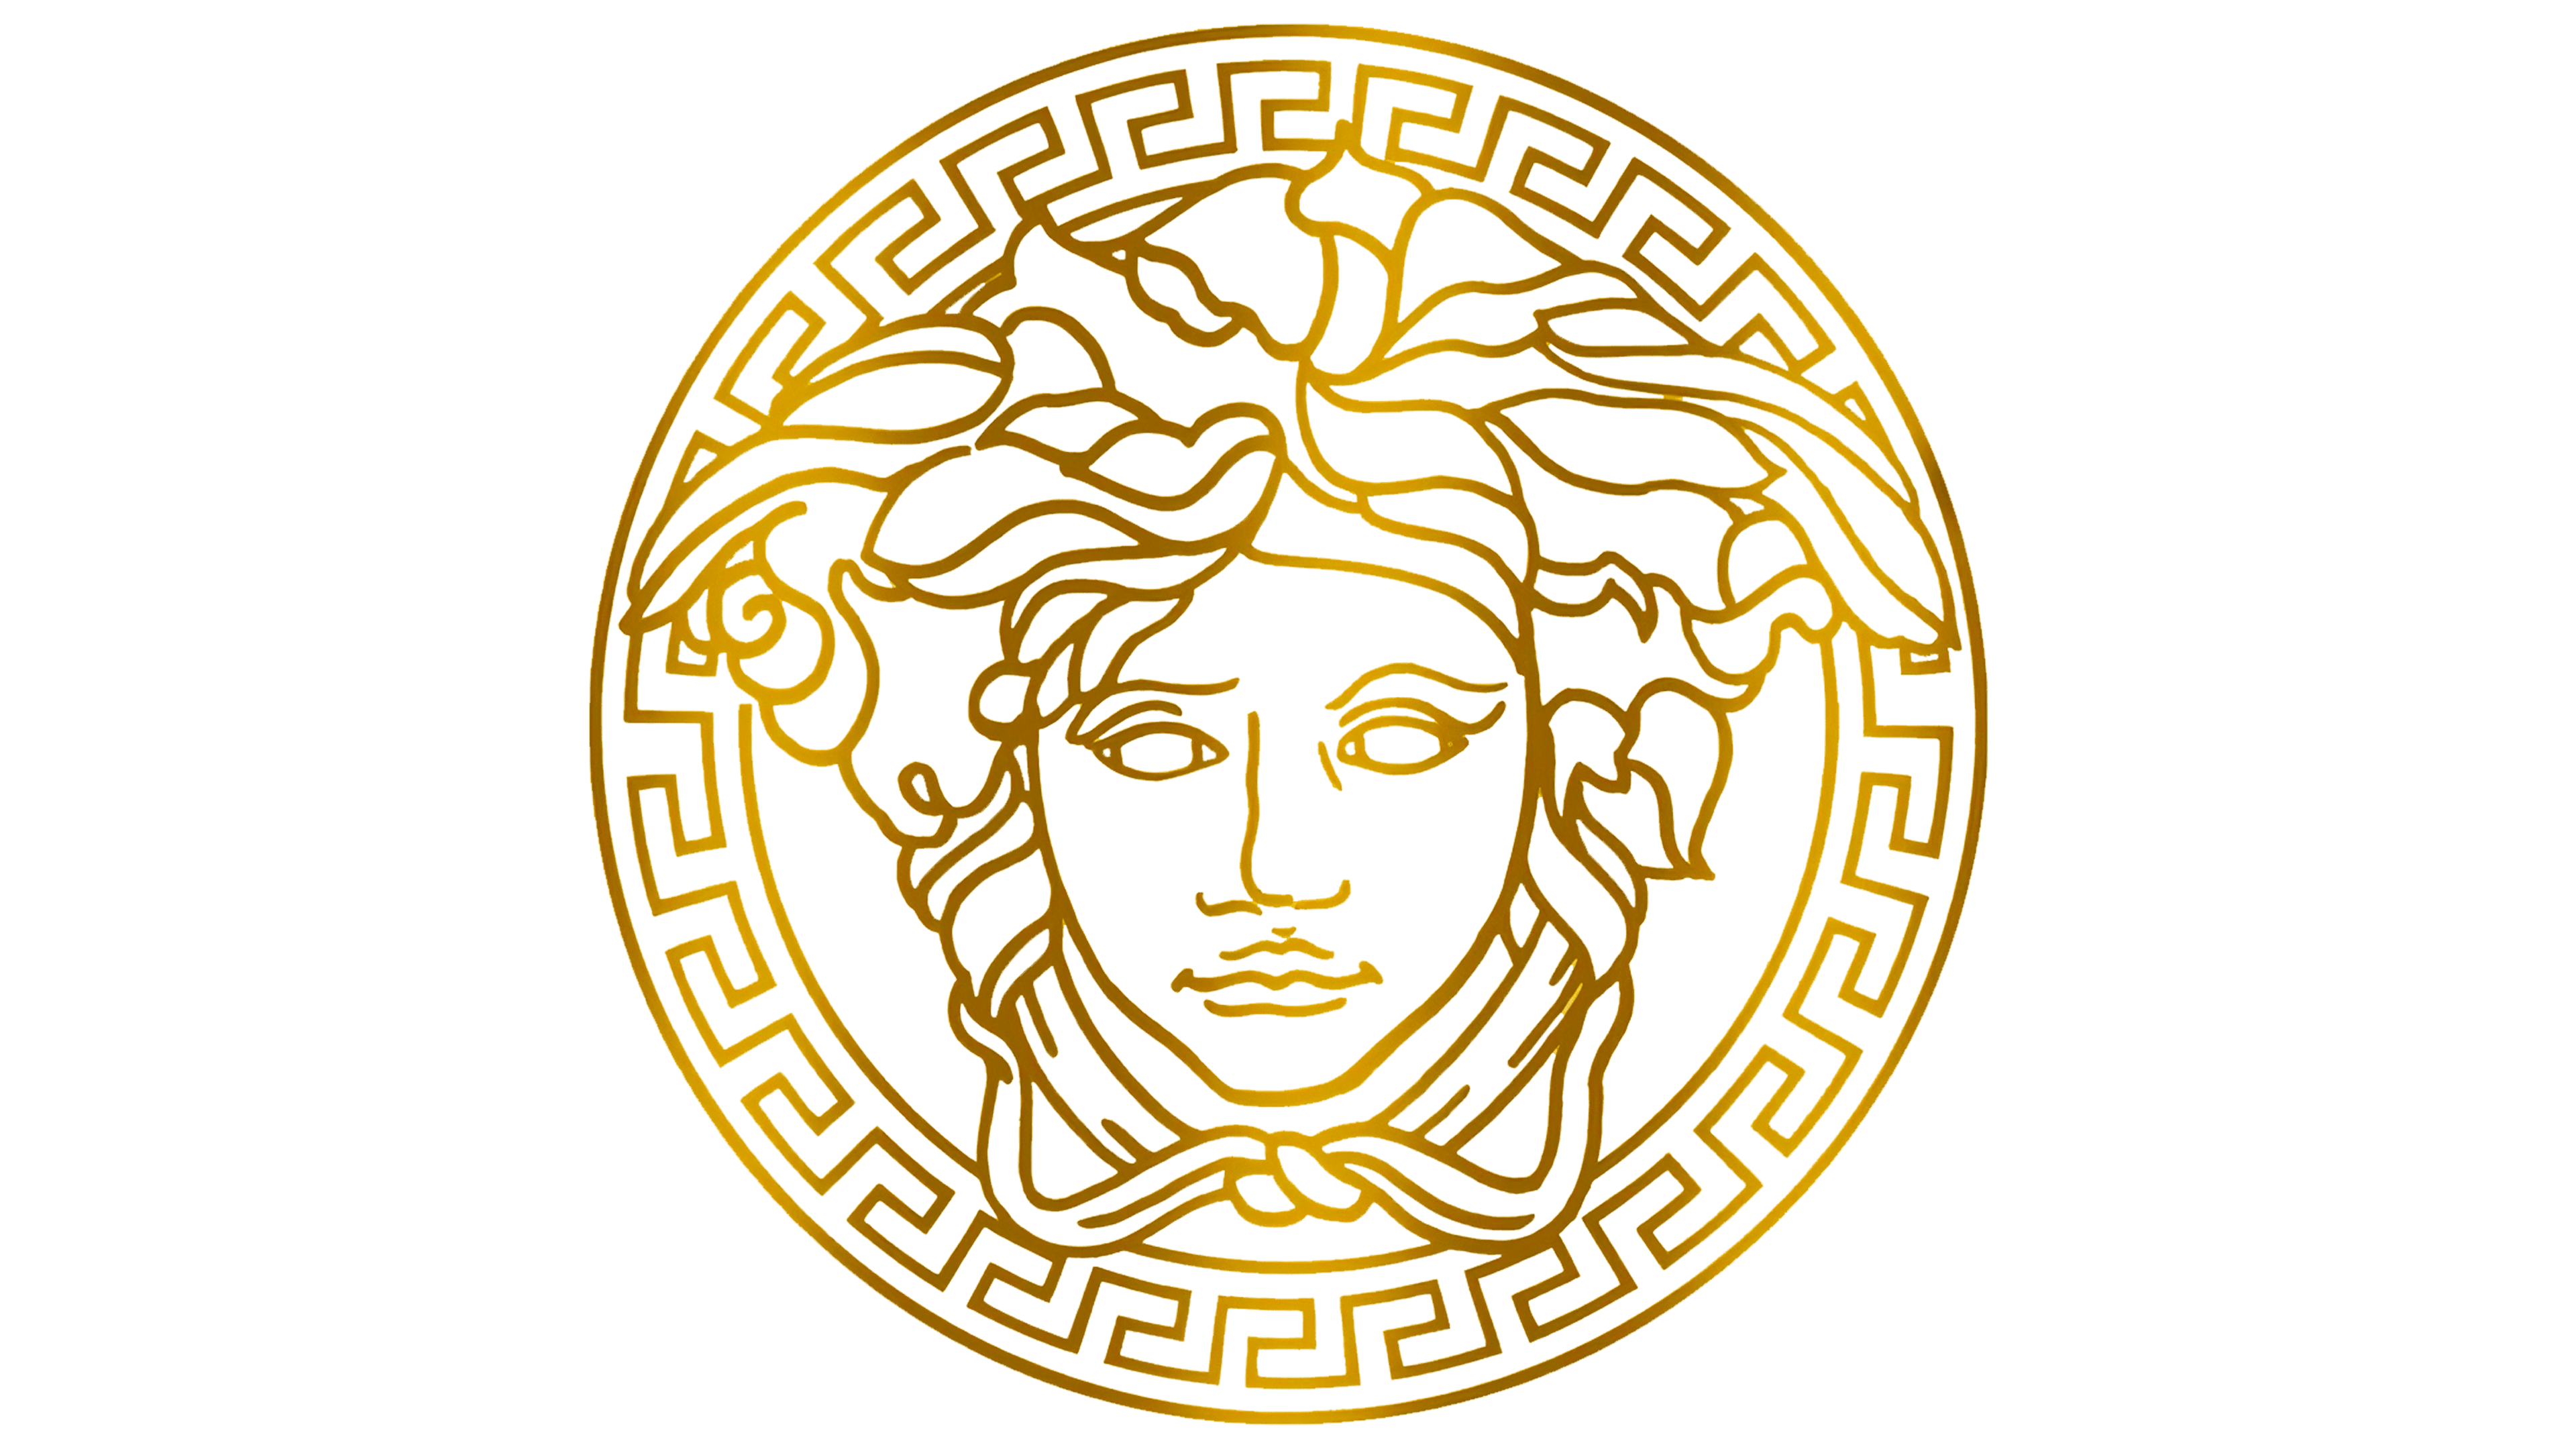 Versace Logo Png PNG Image Collection